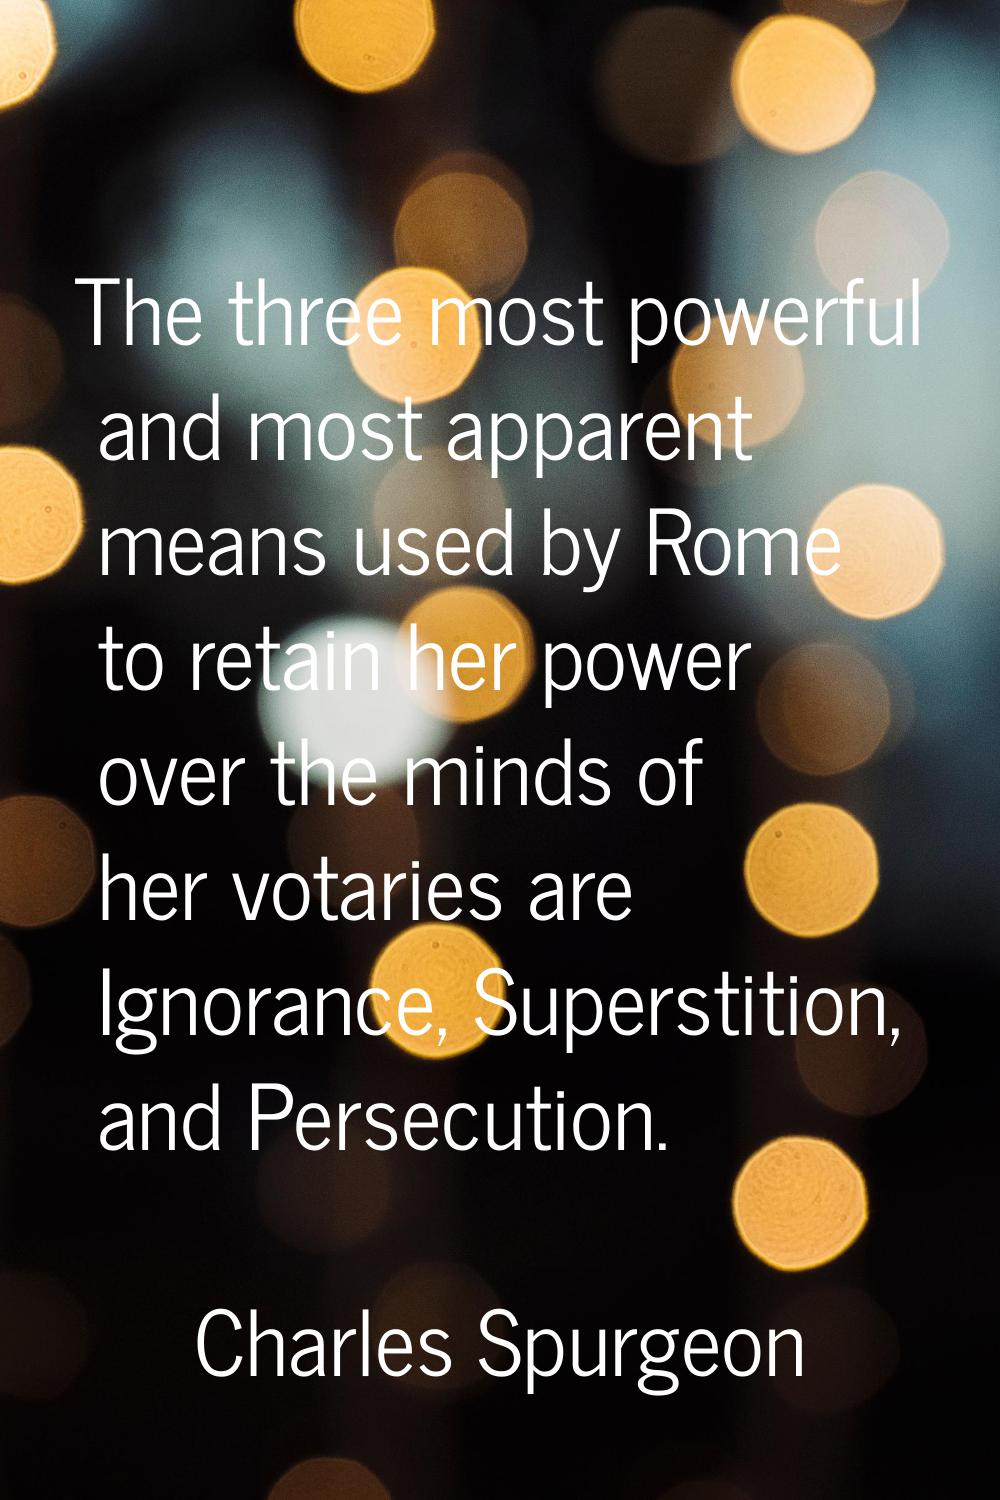 The three most powerful and most apparent means used by Rome to retain her power over the minds of 